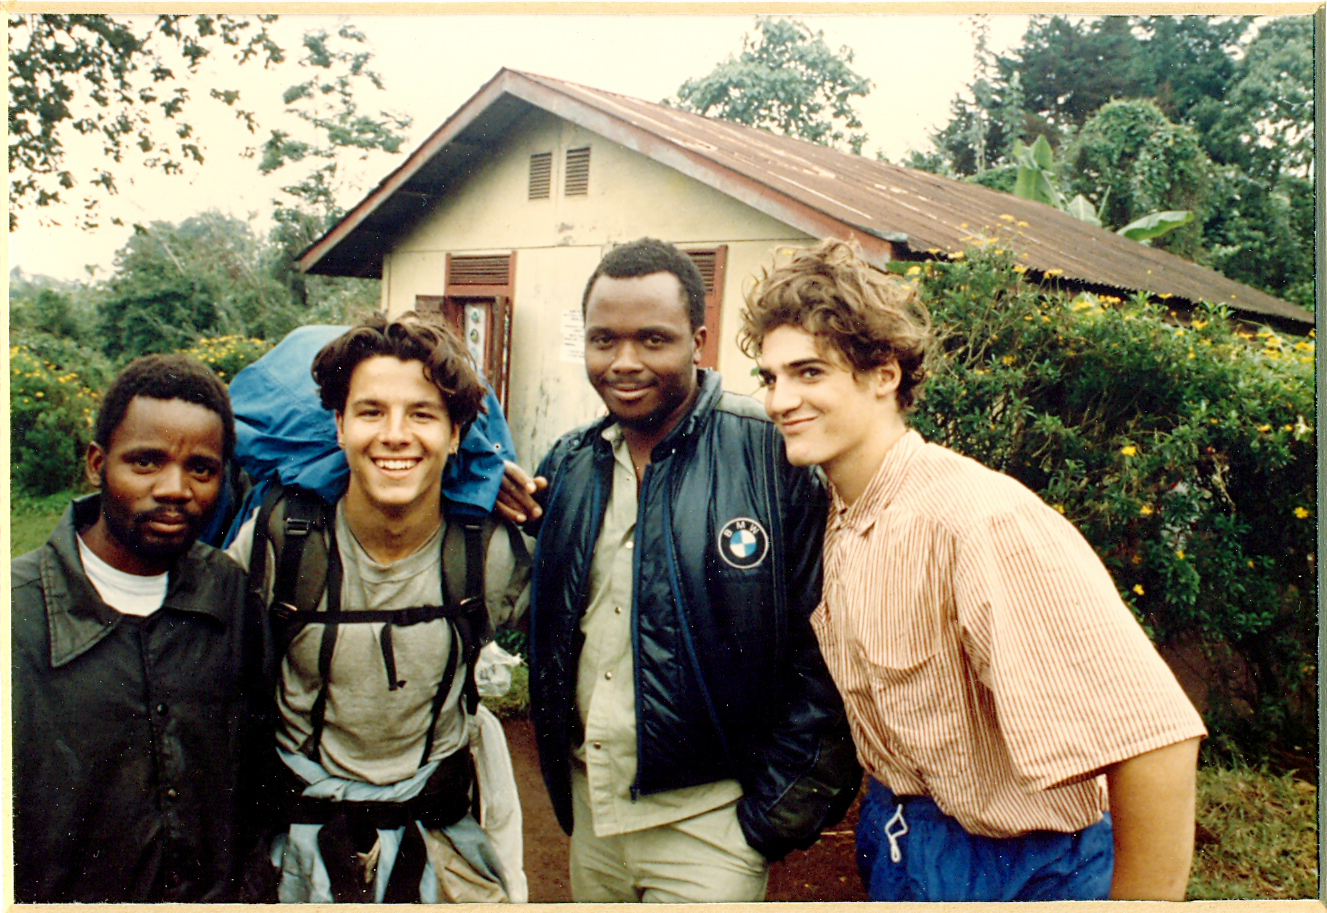 On the slopes of Mt. Kilimanjaro, 1992. The man next to me was the guy I handed a little incentive to, so we could keep climbing